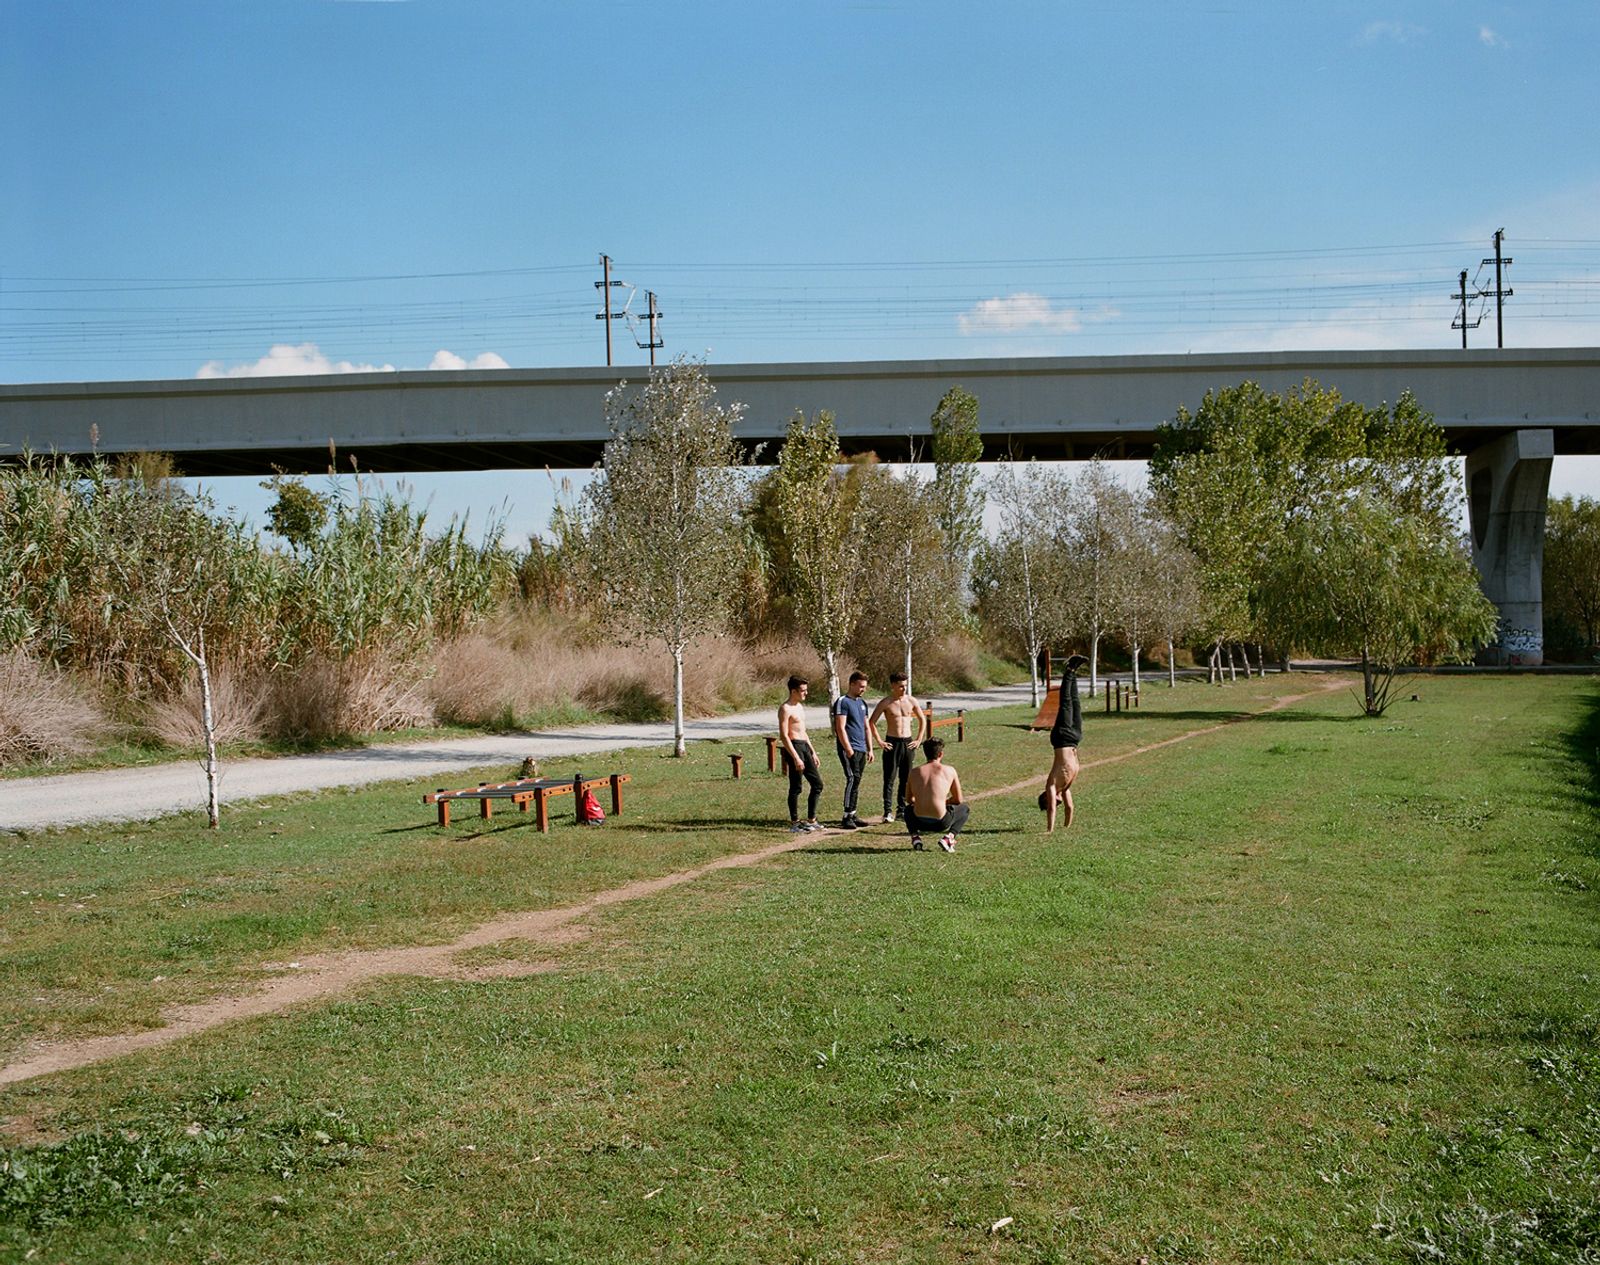 © Edgar dos Santos - Image from the Inventory of bridges and viaducts of the Spanish high-speed rail (AVE) photography project